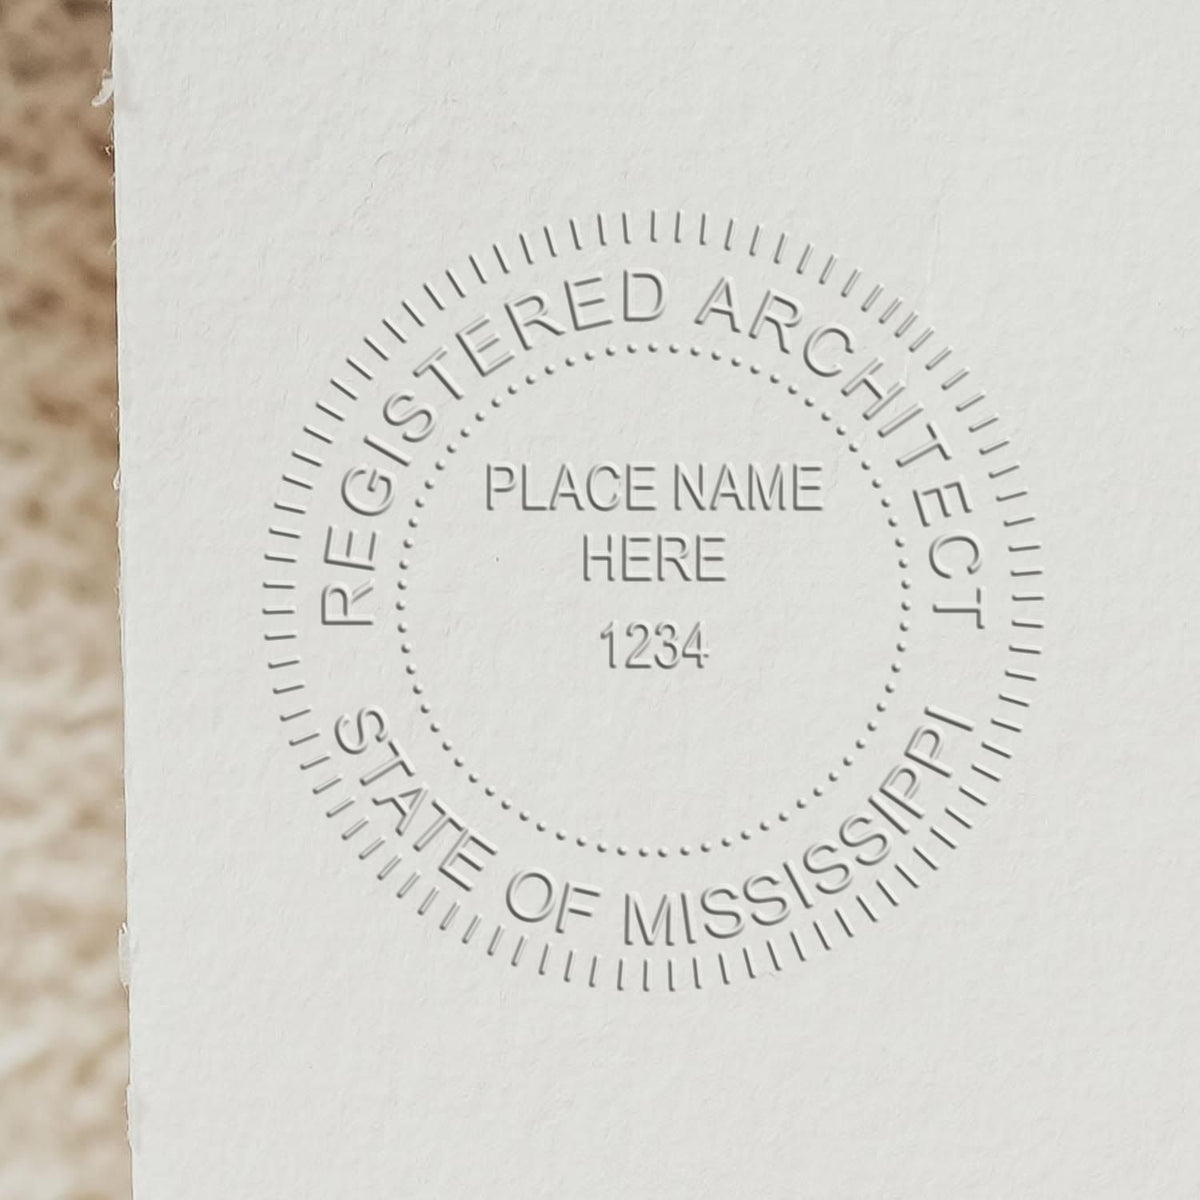 A stamped impression of the Mississippi Desk Architect Embossing Seal in this stylish lifestyle photo, setting the tone for a unique and personalized product.